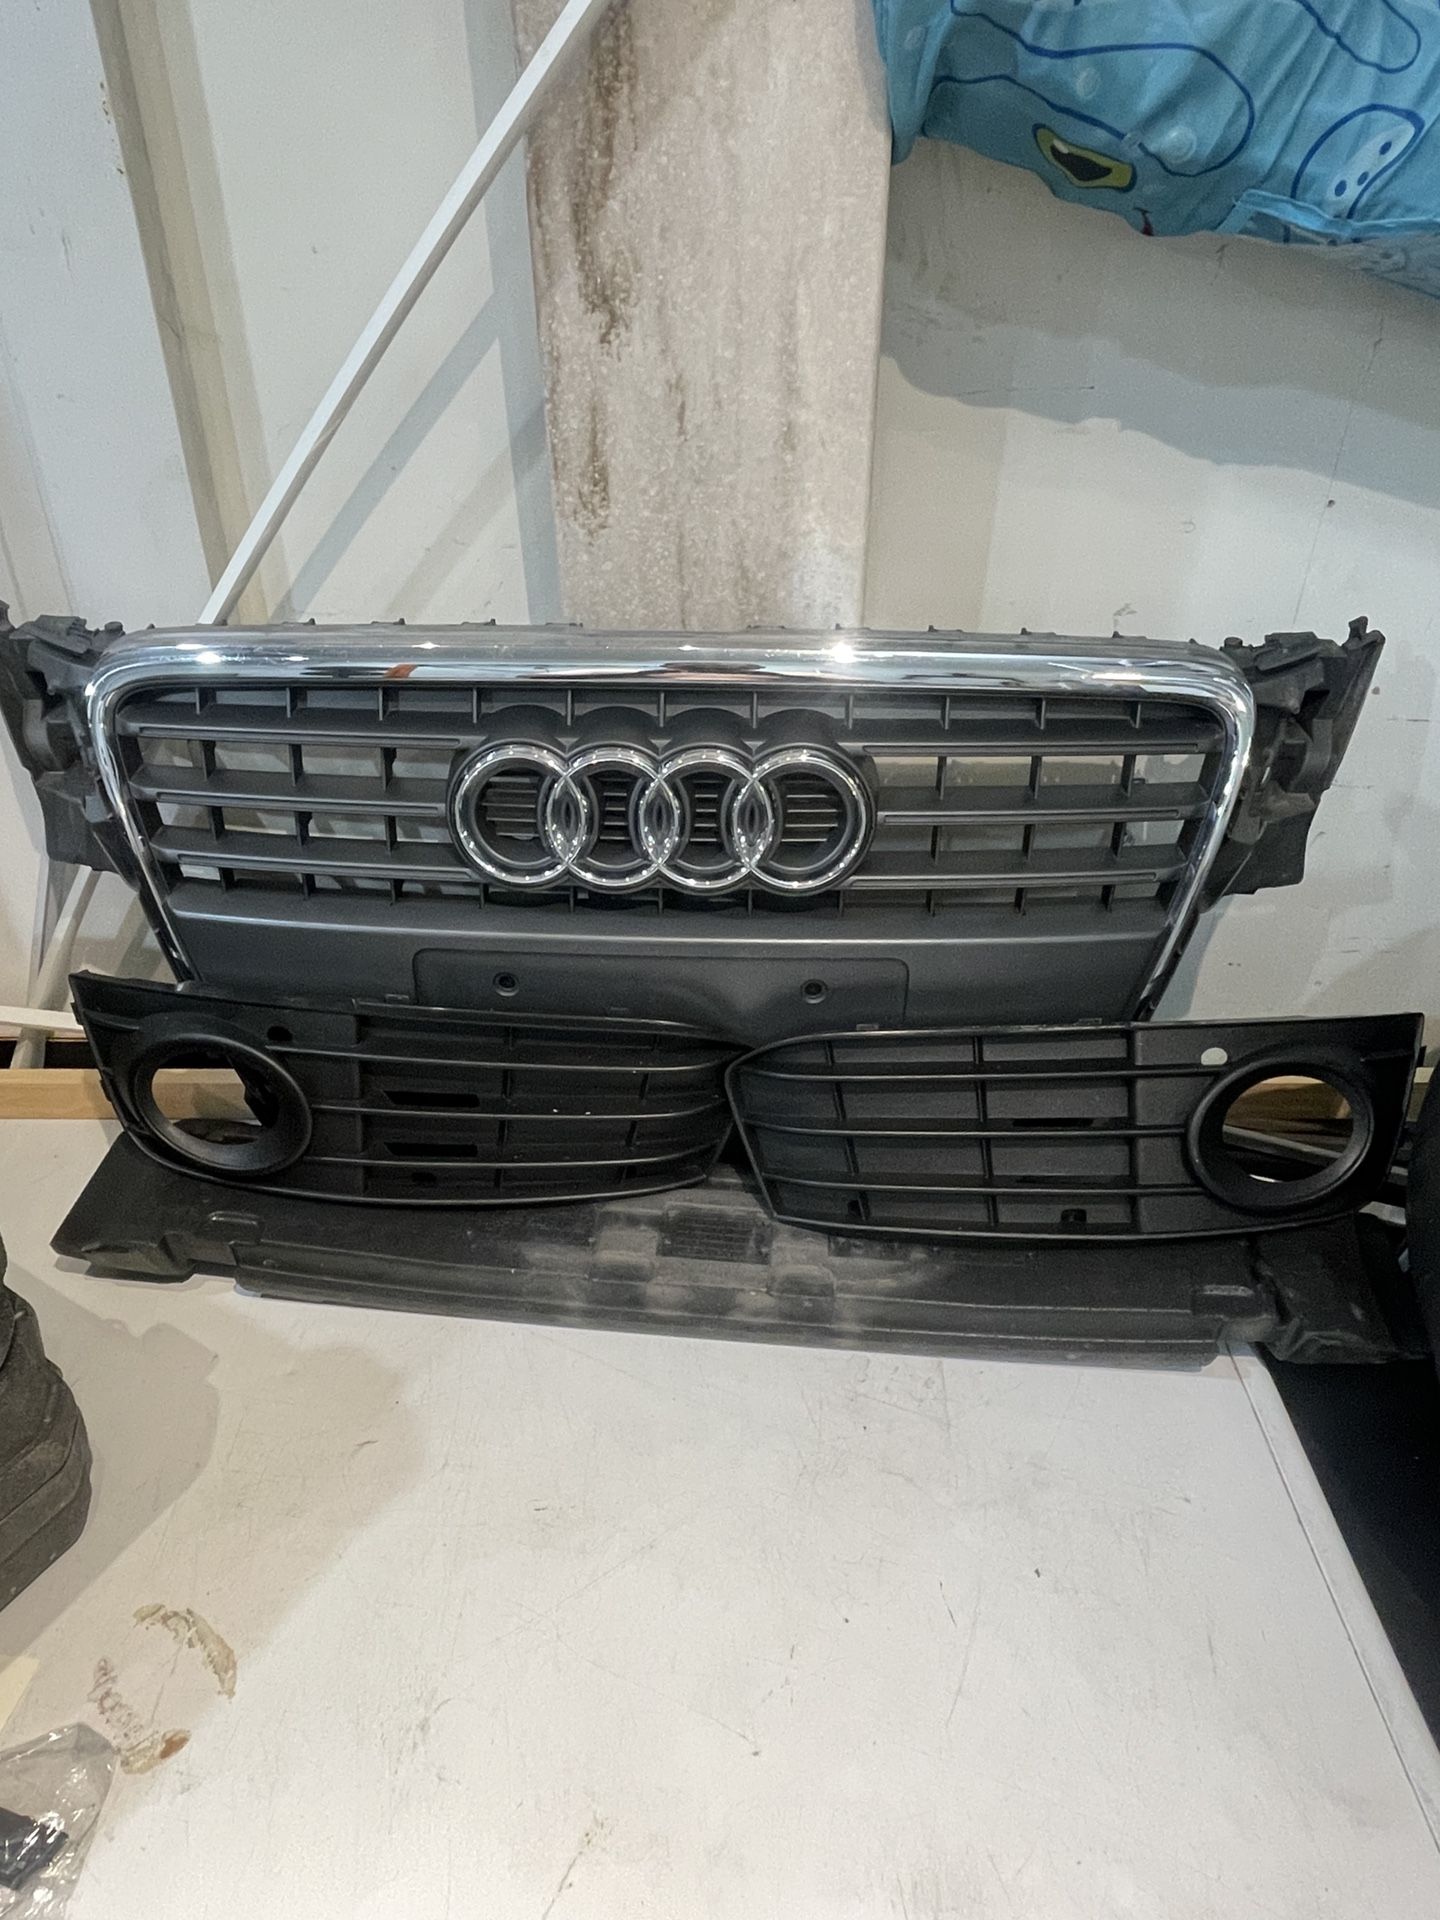 2009 Audi A4 Grill And Fog Lights 